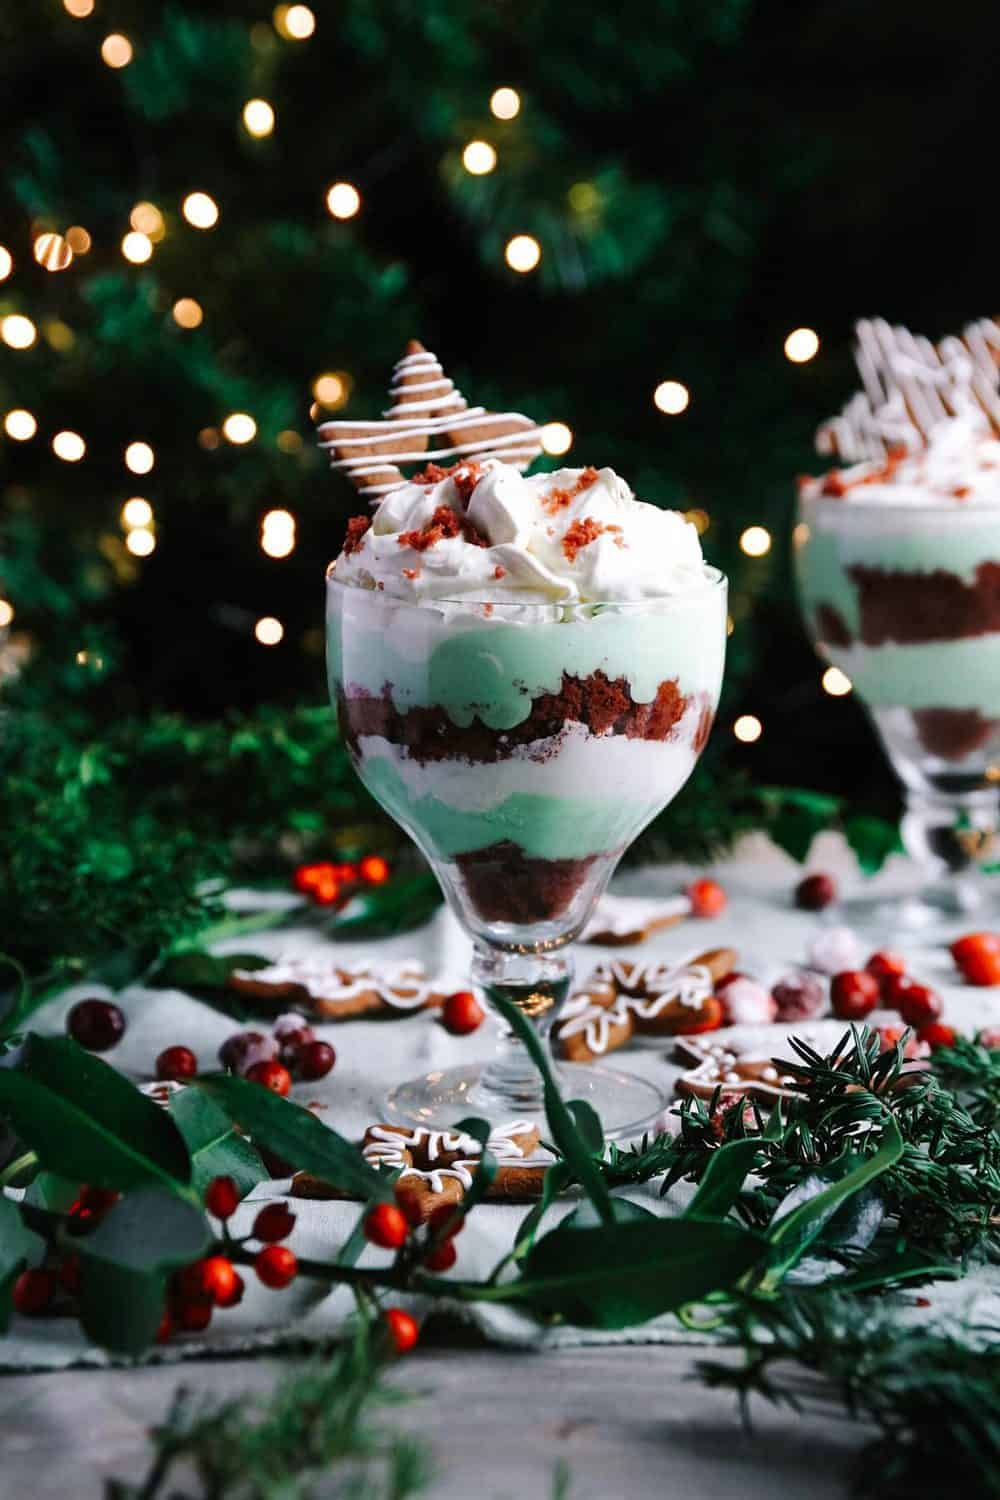 A glass with dessert trifle sitting on a table with Christmas decorations